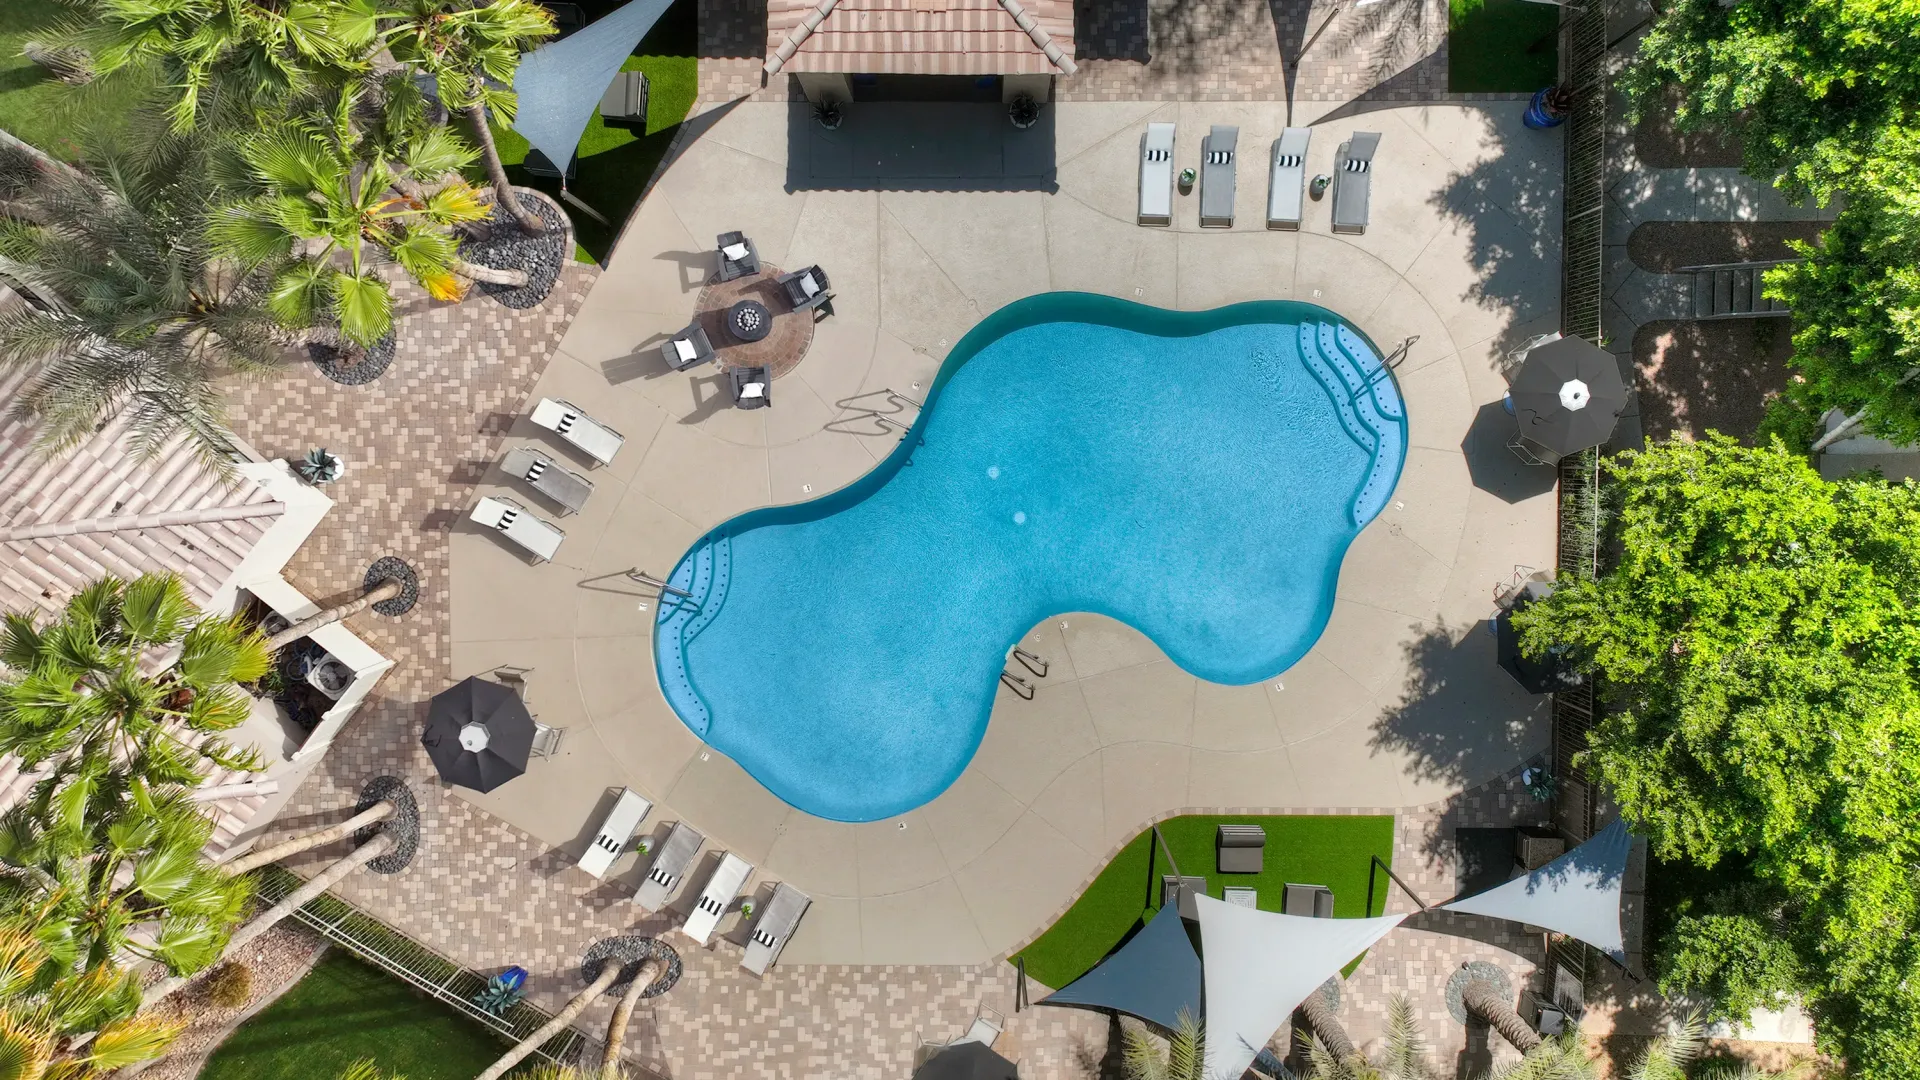 An aerial view of the sun deck overlooking the picturesque pool, creating a regal poolside paradise.